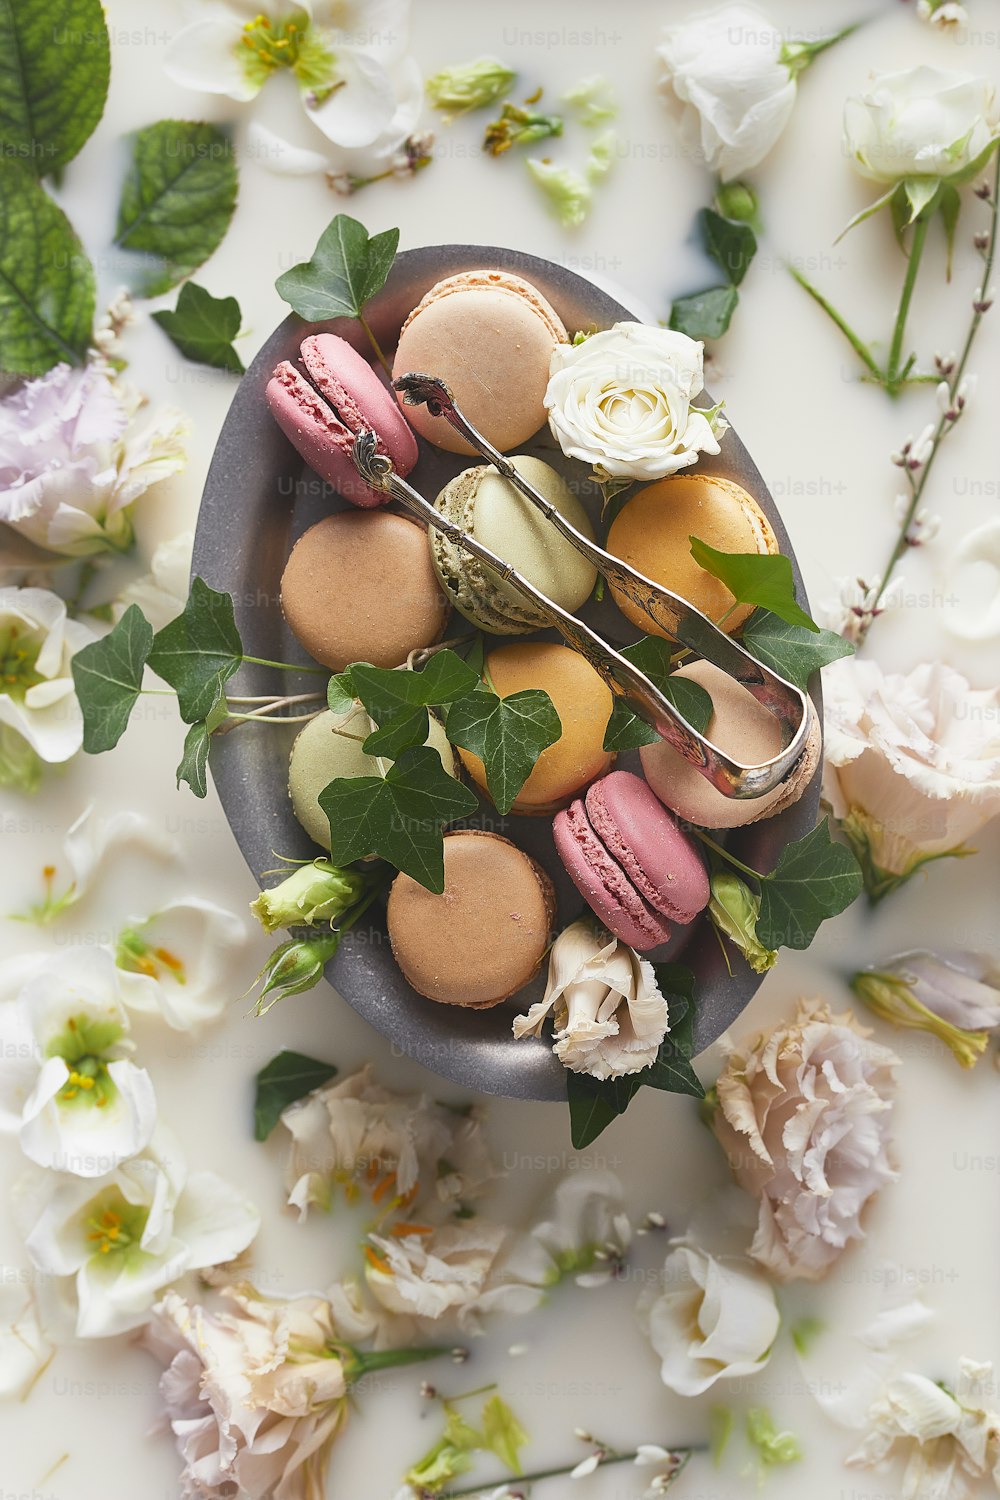 a bowl of macaroons and flowers on a table